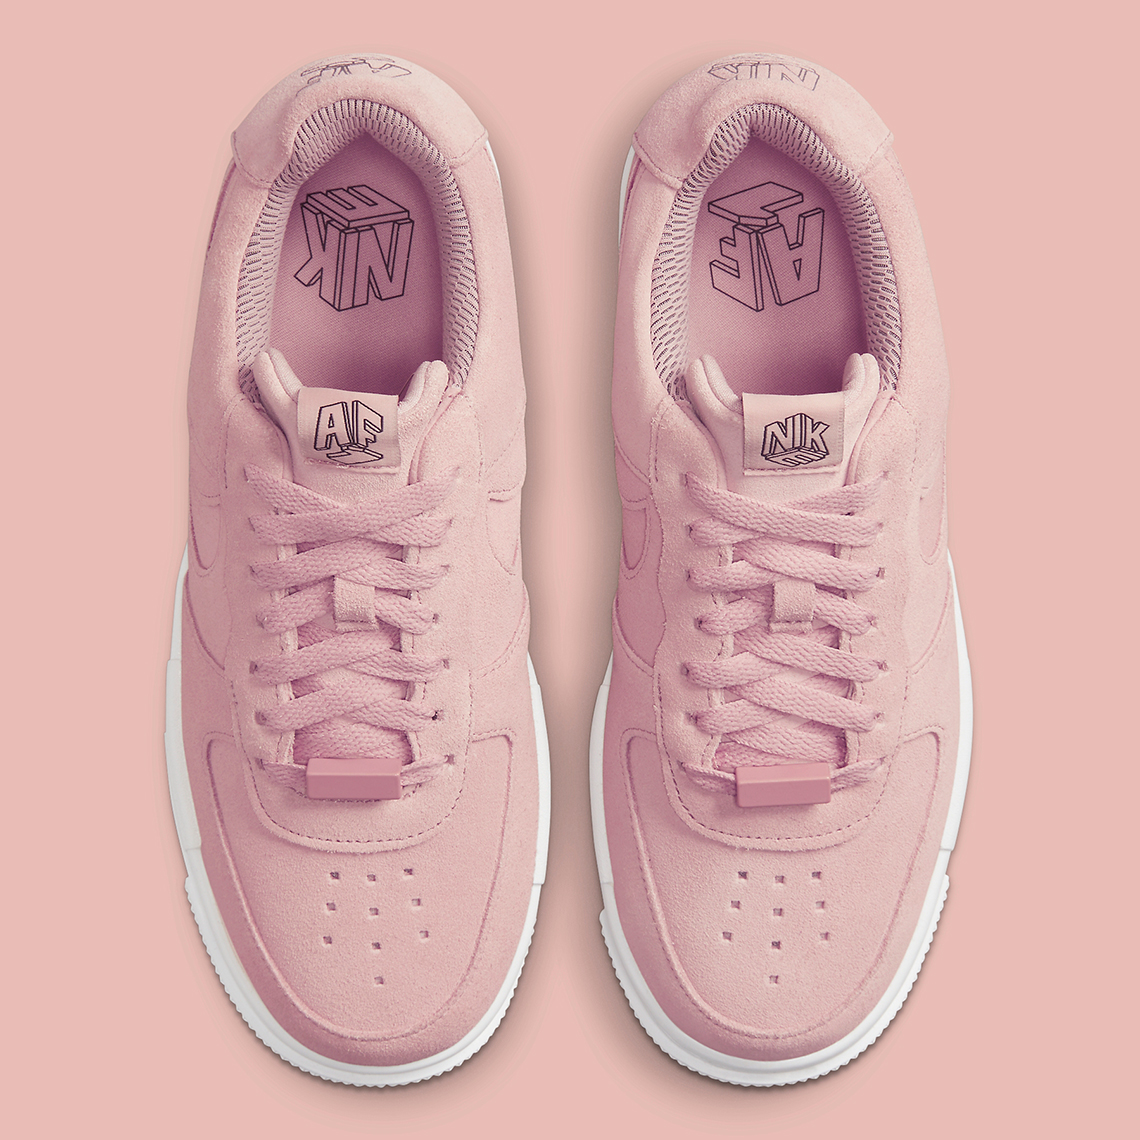 Nike Air Force 1 Pink Suede Dq5570 600 4